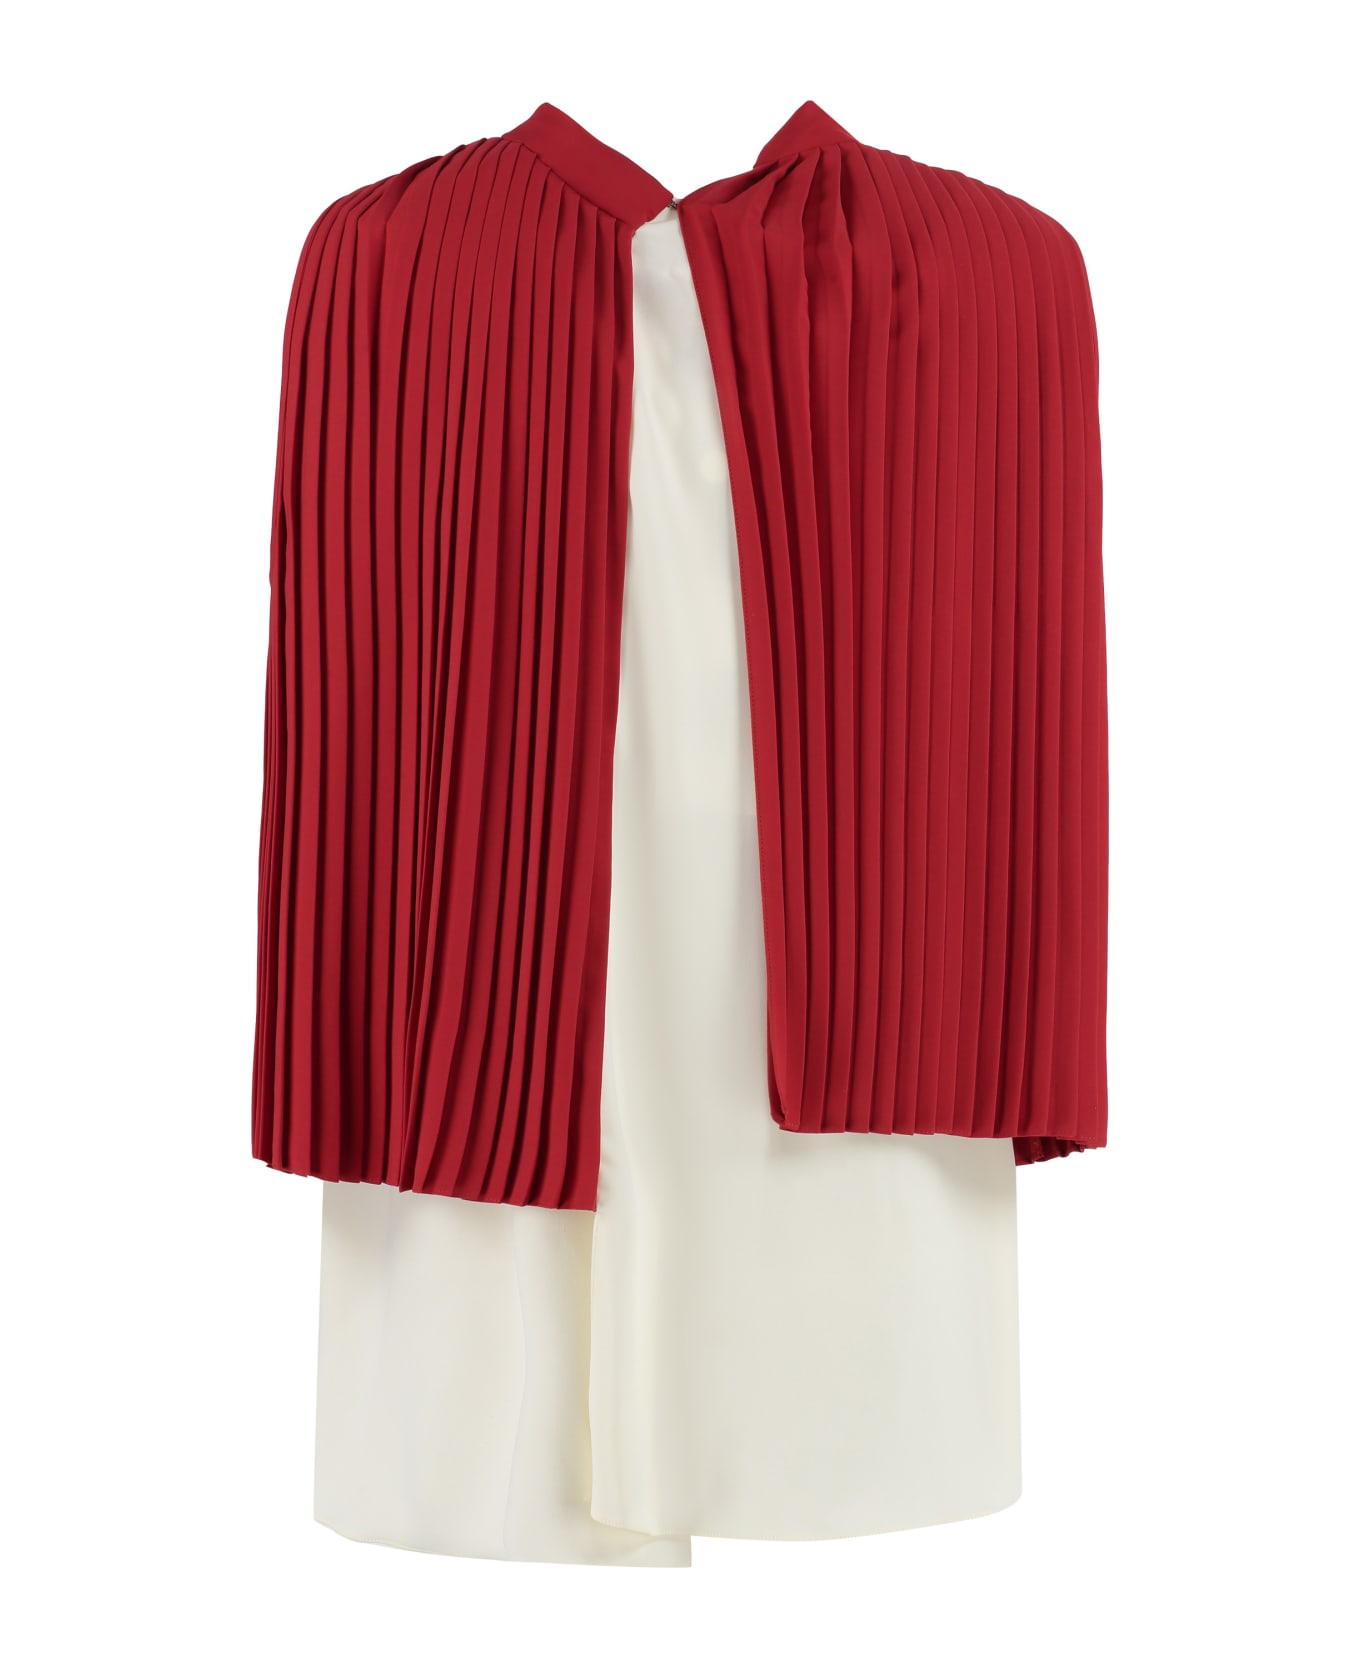 MM6 Maison Margiela Pleated Top - red